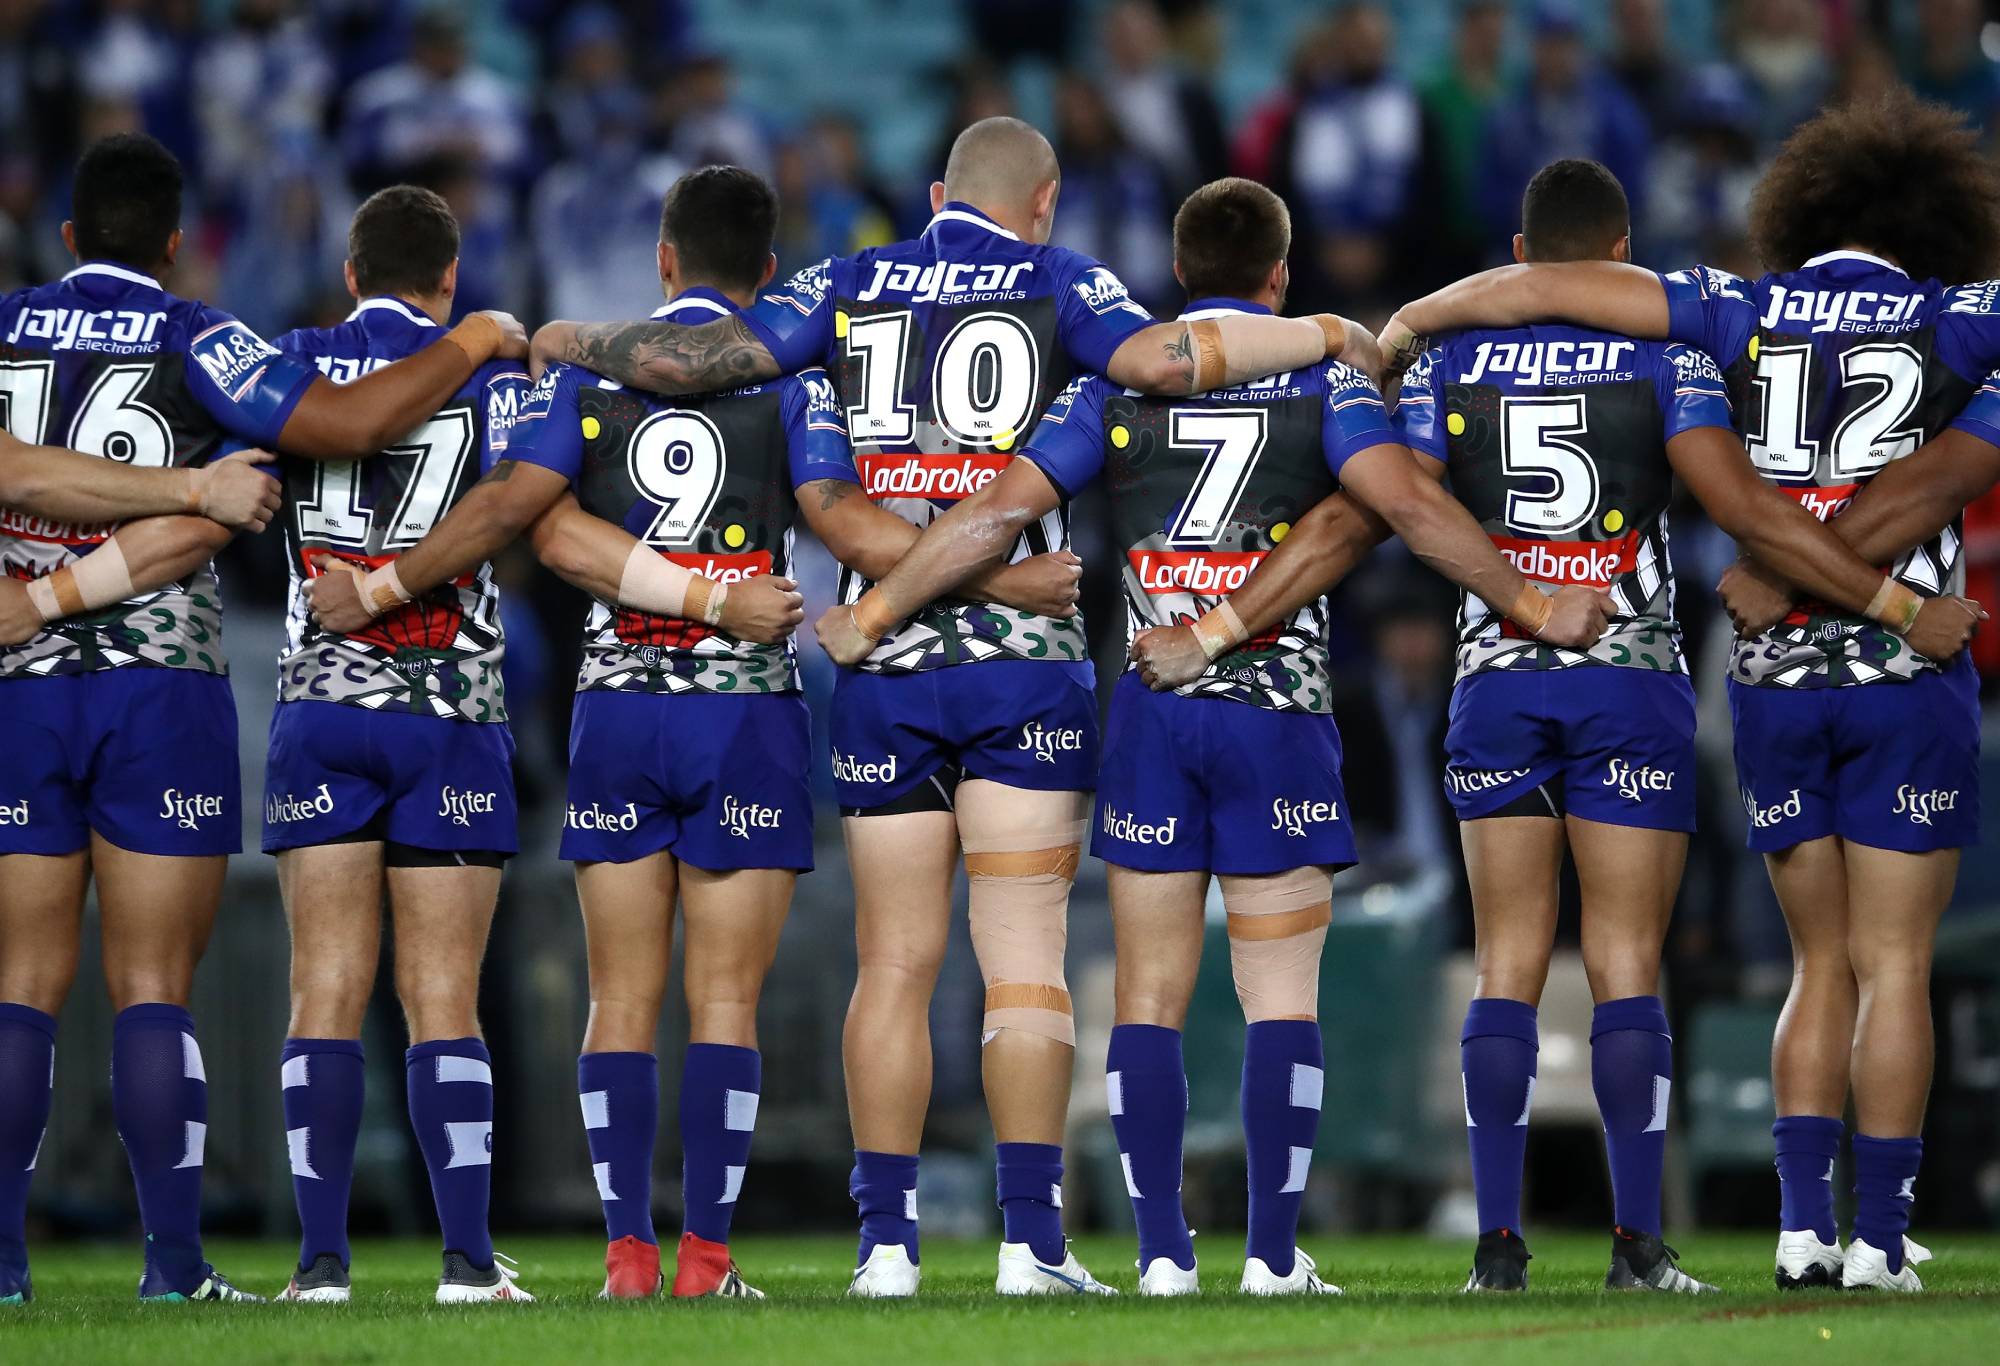 SYDNEY, AUSTRALIA - MAY 11: Bulldogs players line up for the national anthem during the round 10 NRL match between the Canterbury Bulldogs and the Parramatta Eels at ANZ Stadium on May 11, 2018 in Sydney, Australia. (Photo by Cameron Spencer/Getty Images)